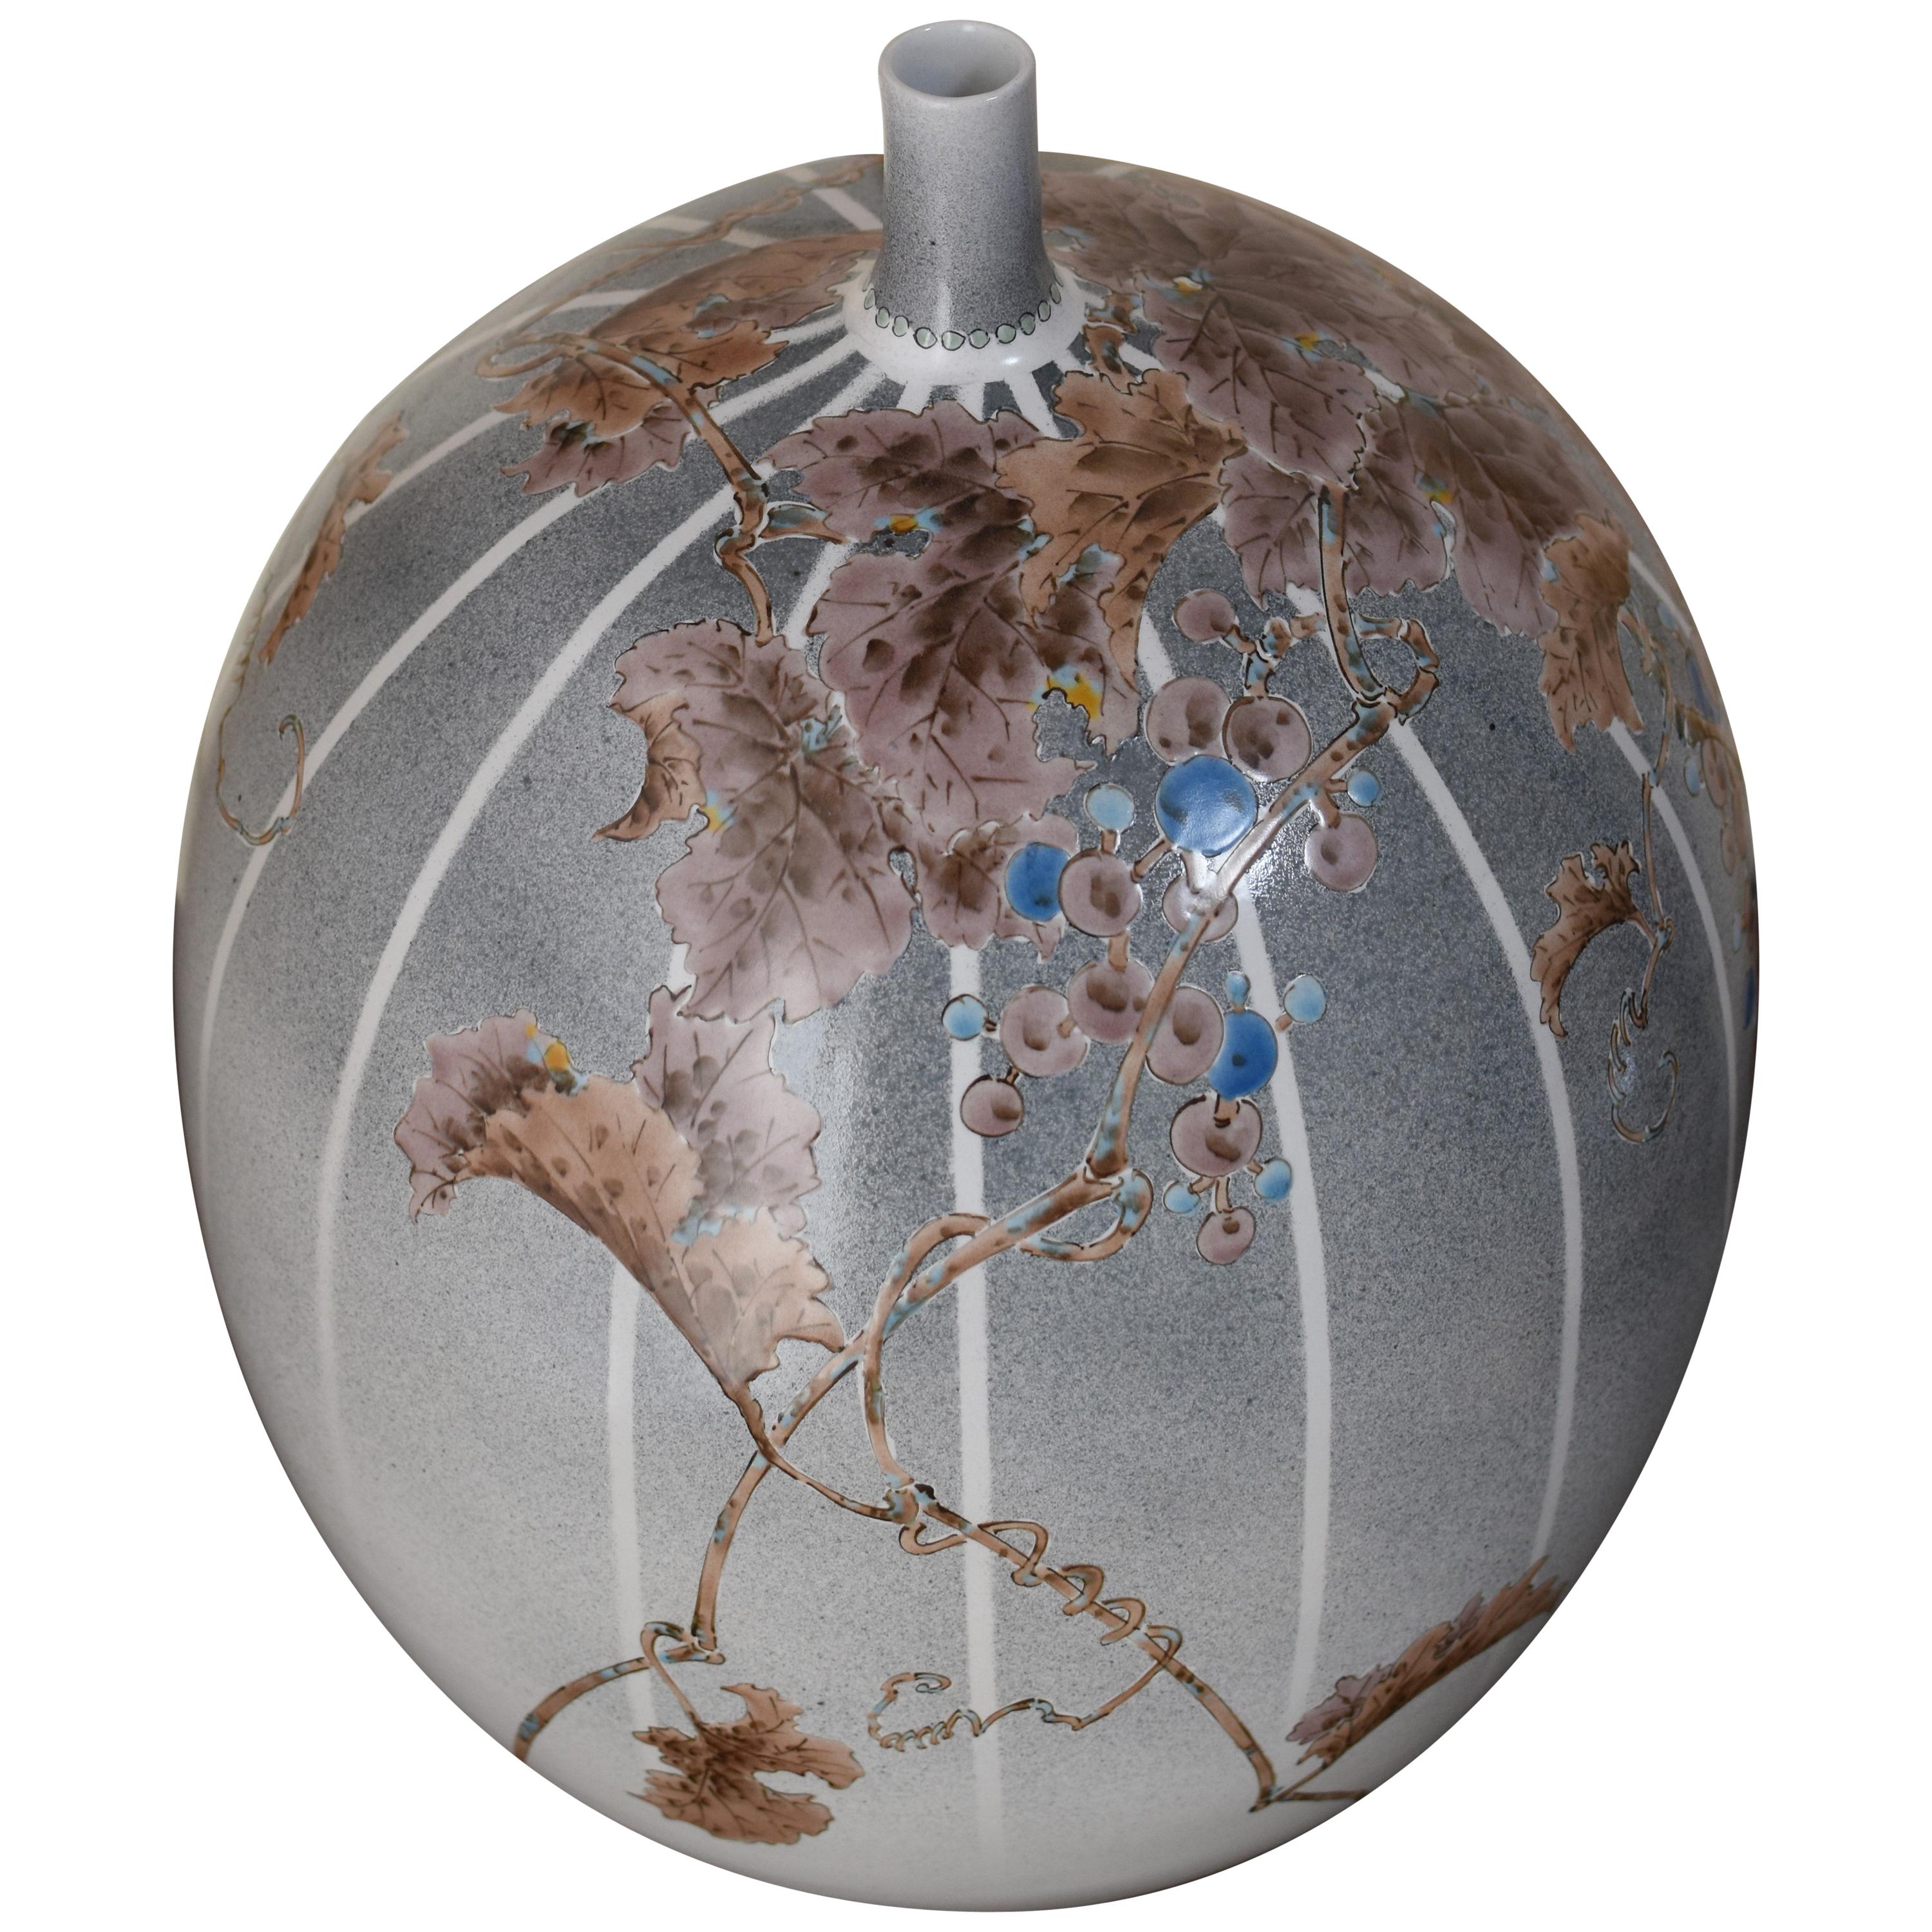 Exceptional Japanese contemporary decorative porcelain vase, stunningly hand painted in brown on a stunning egg shape body in beautiful background with stripes on a blue/gray gradation. It is a masterpiece by a highly acclaimed award-winning Kutani